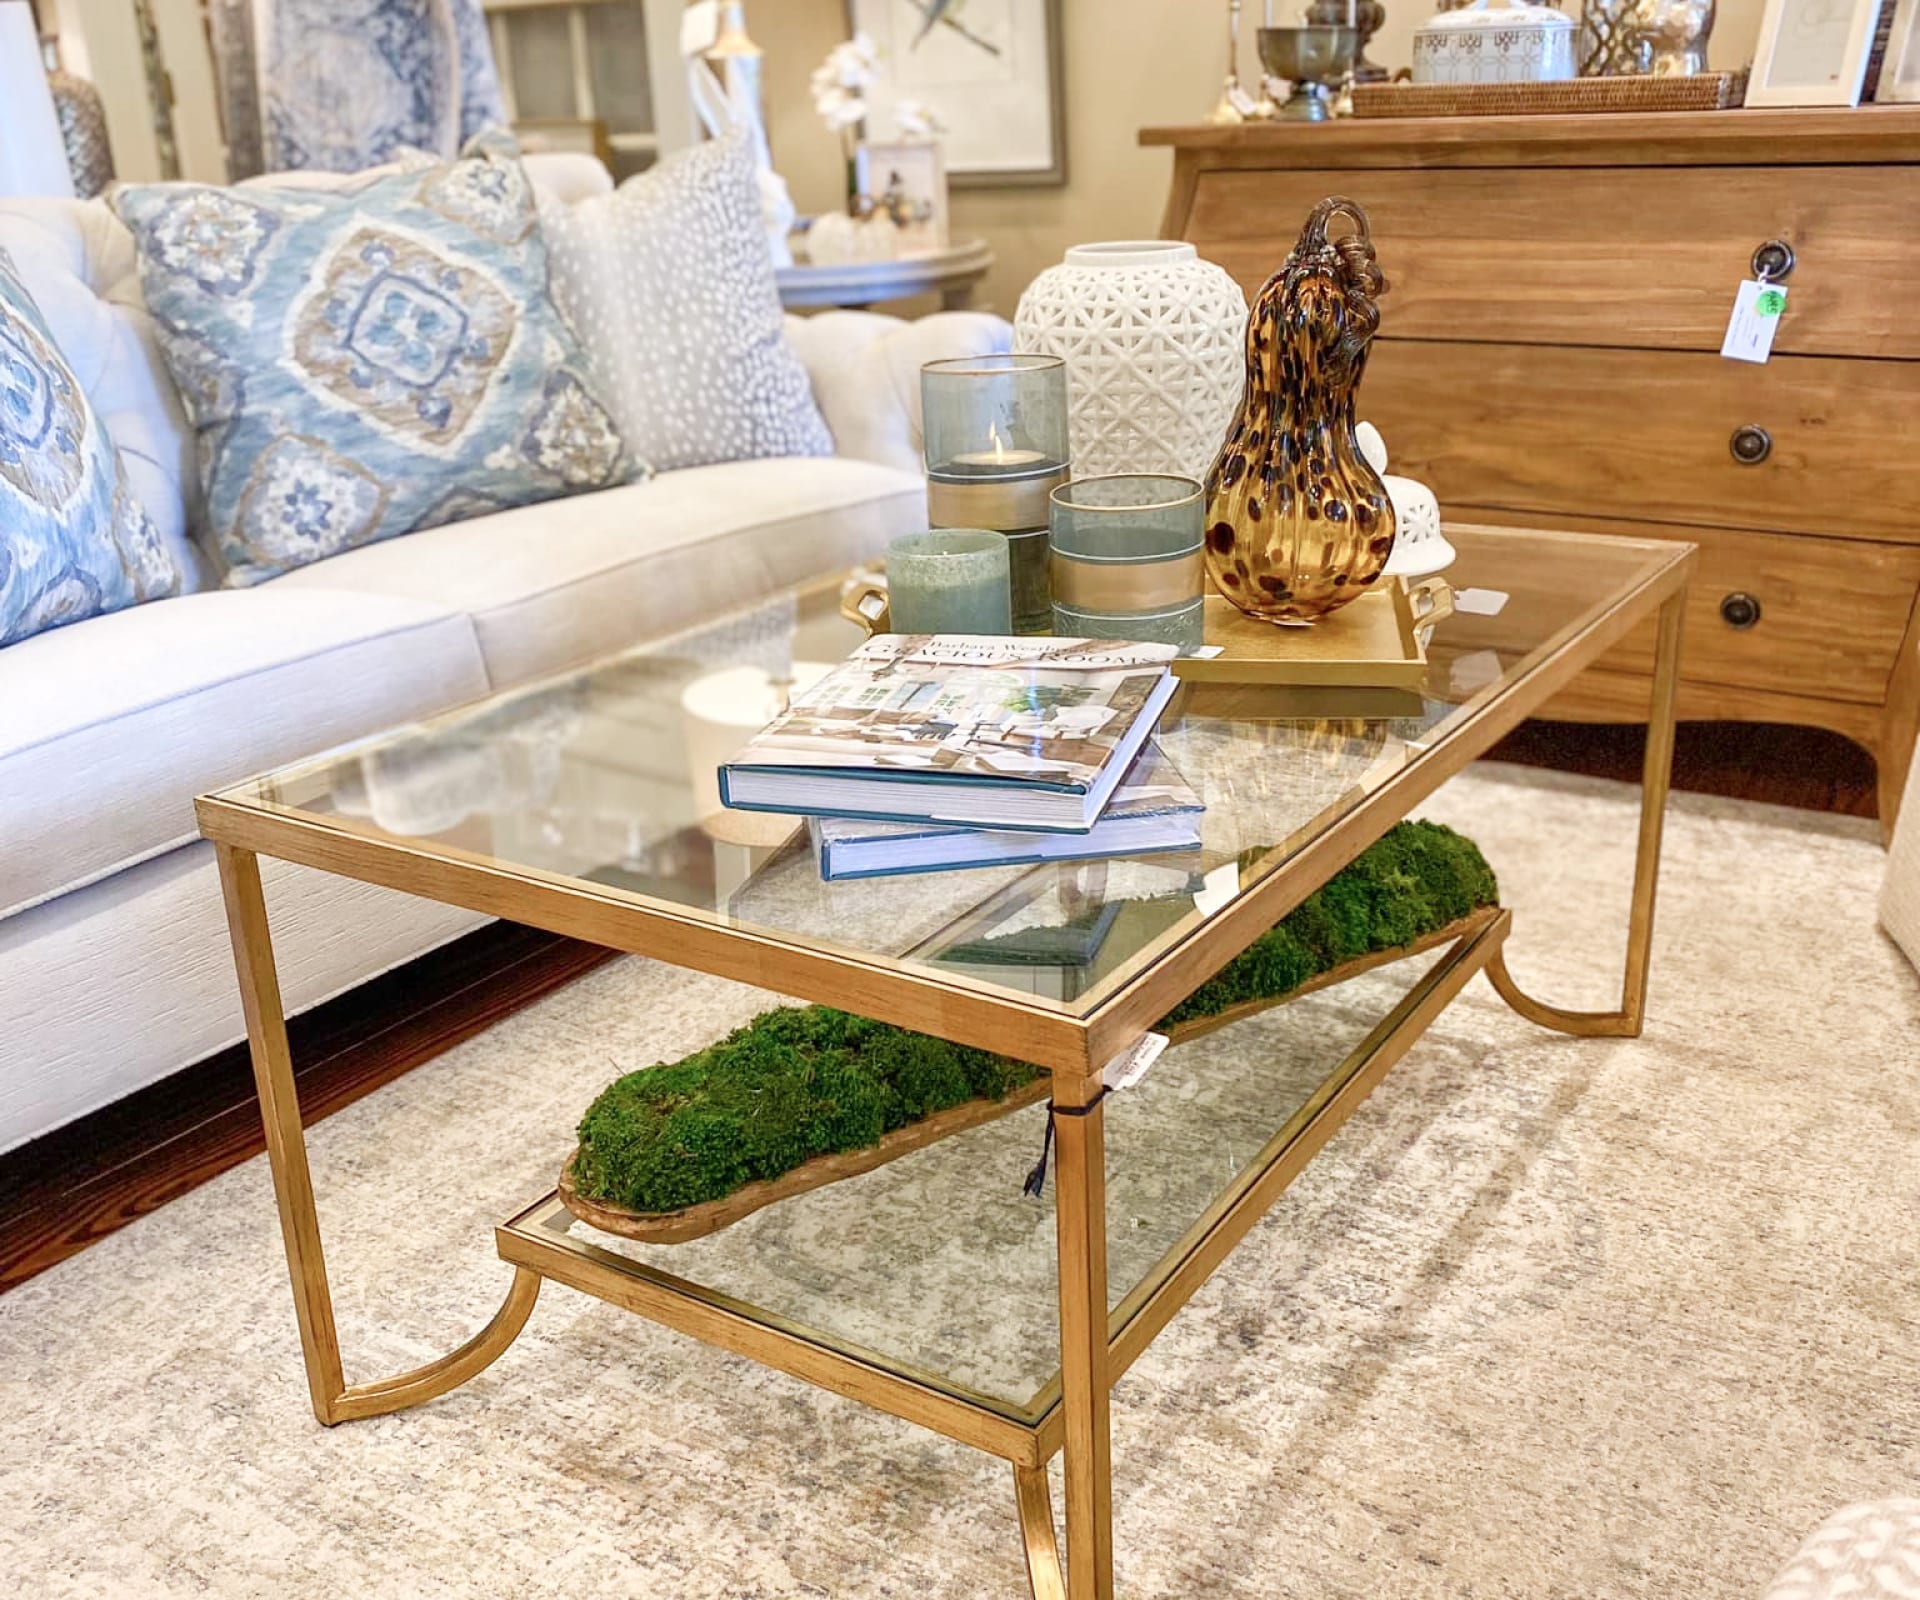 A glass coffee table with various southern-rustic pieces